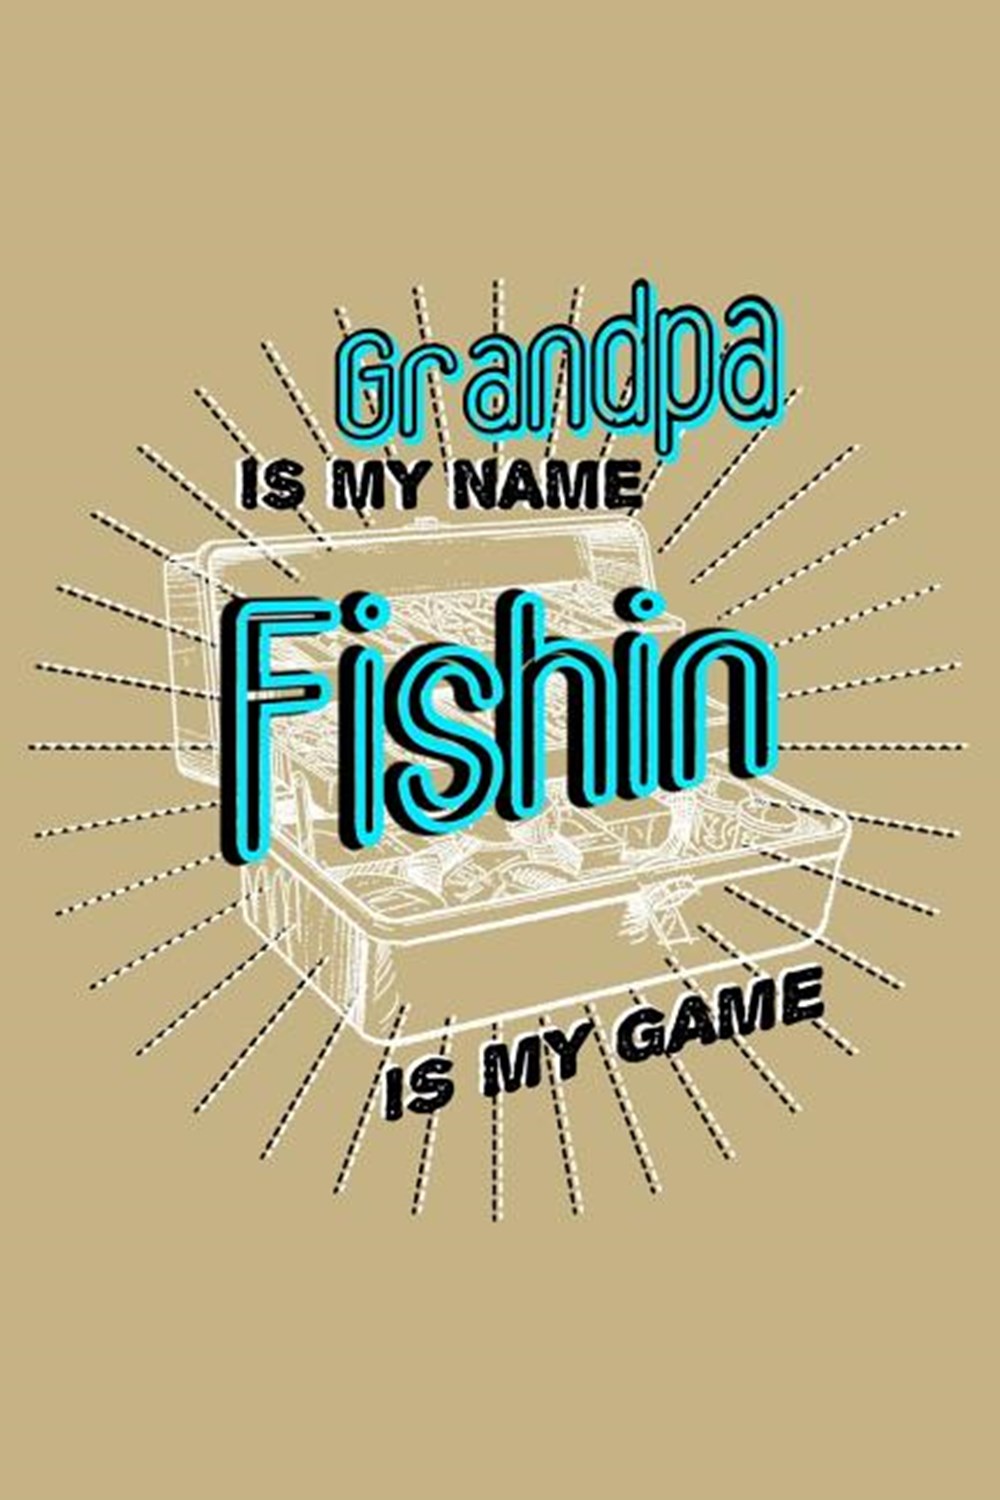 Grandpa Is My Name Fishin Is My Game Blank Paper Sketch Book - Artist Sketch Pad Journal for Sketchi